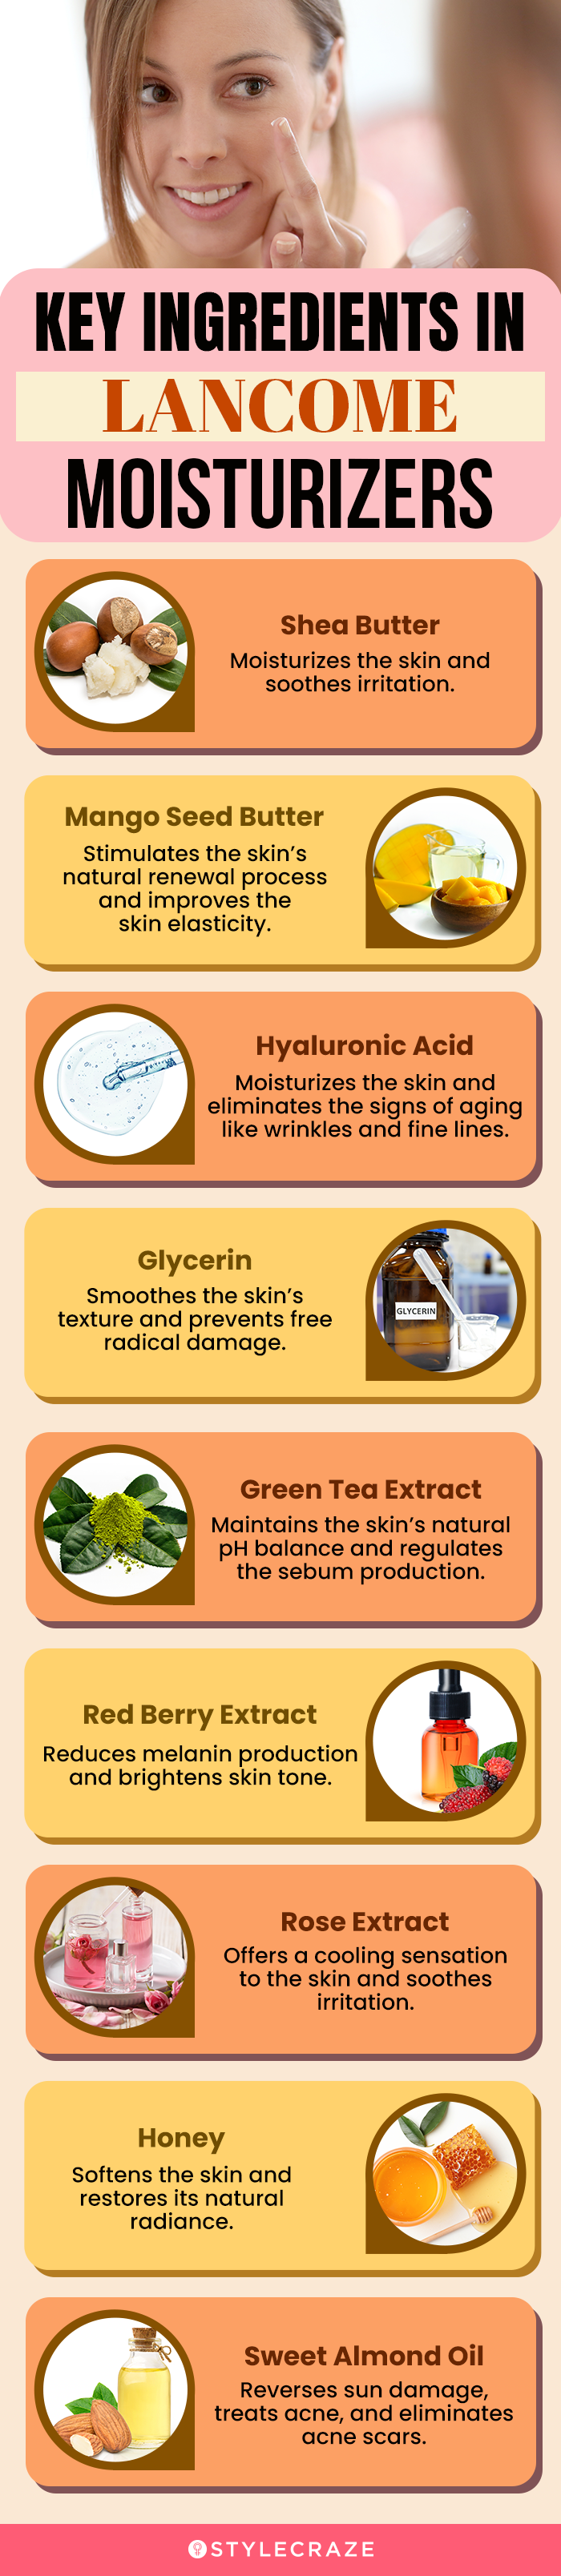 Key Ingredients In Lancome Moisturizers (infographic)